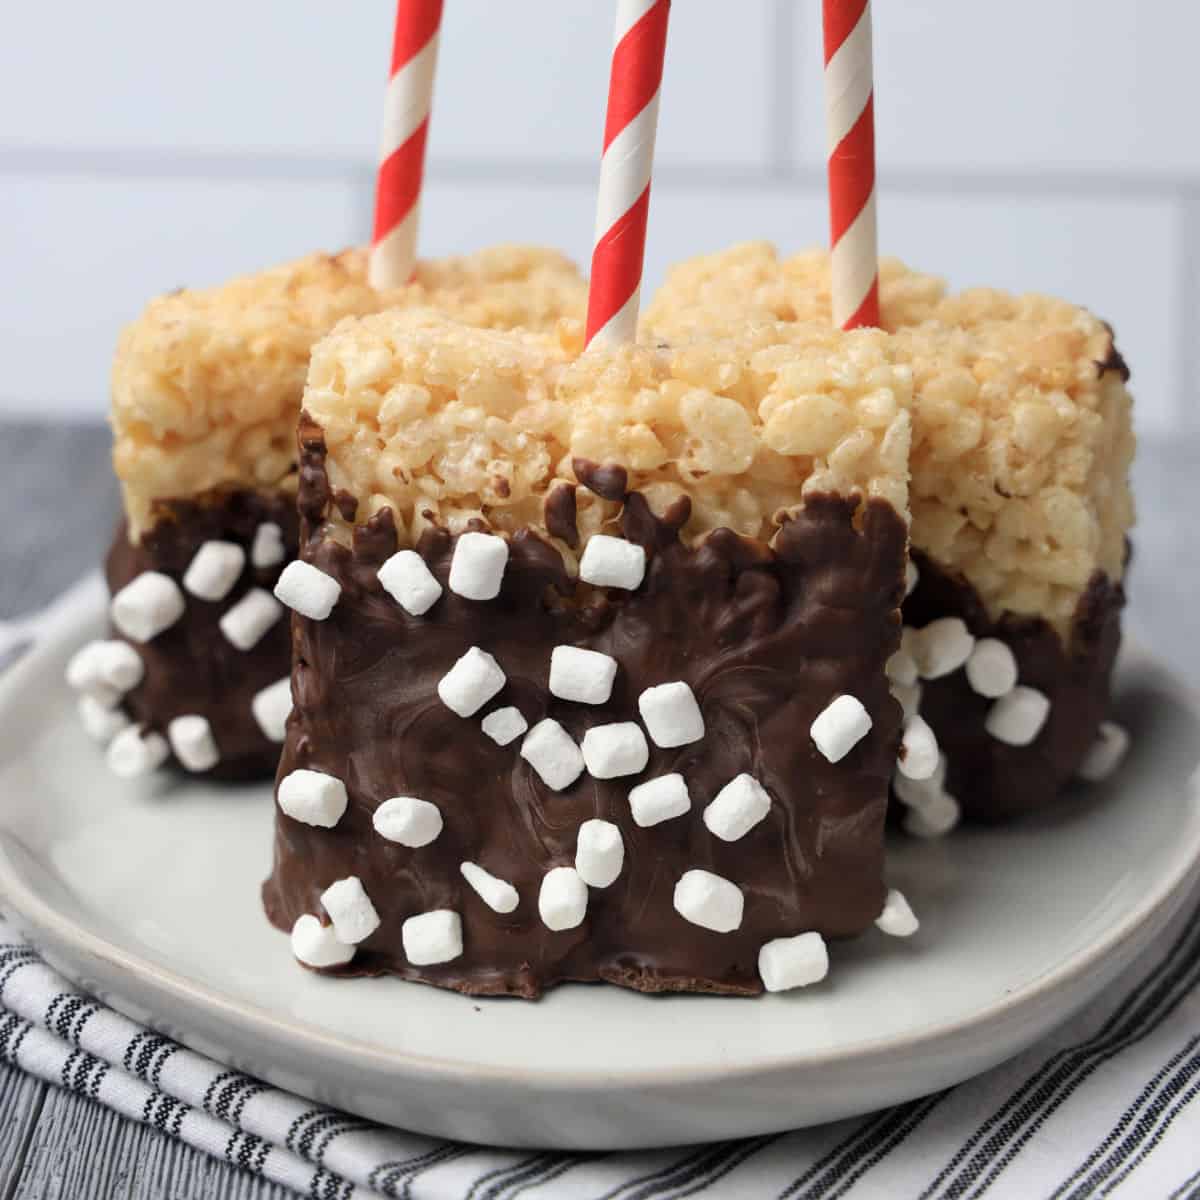 Blog: Chocolate-Dipped Rice Krispies Treats on a Stick